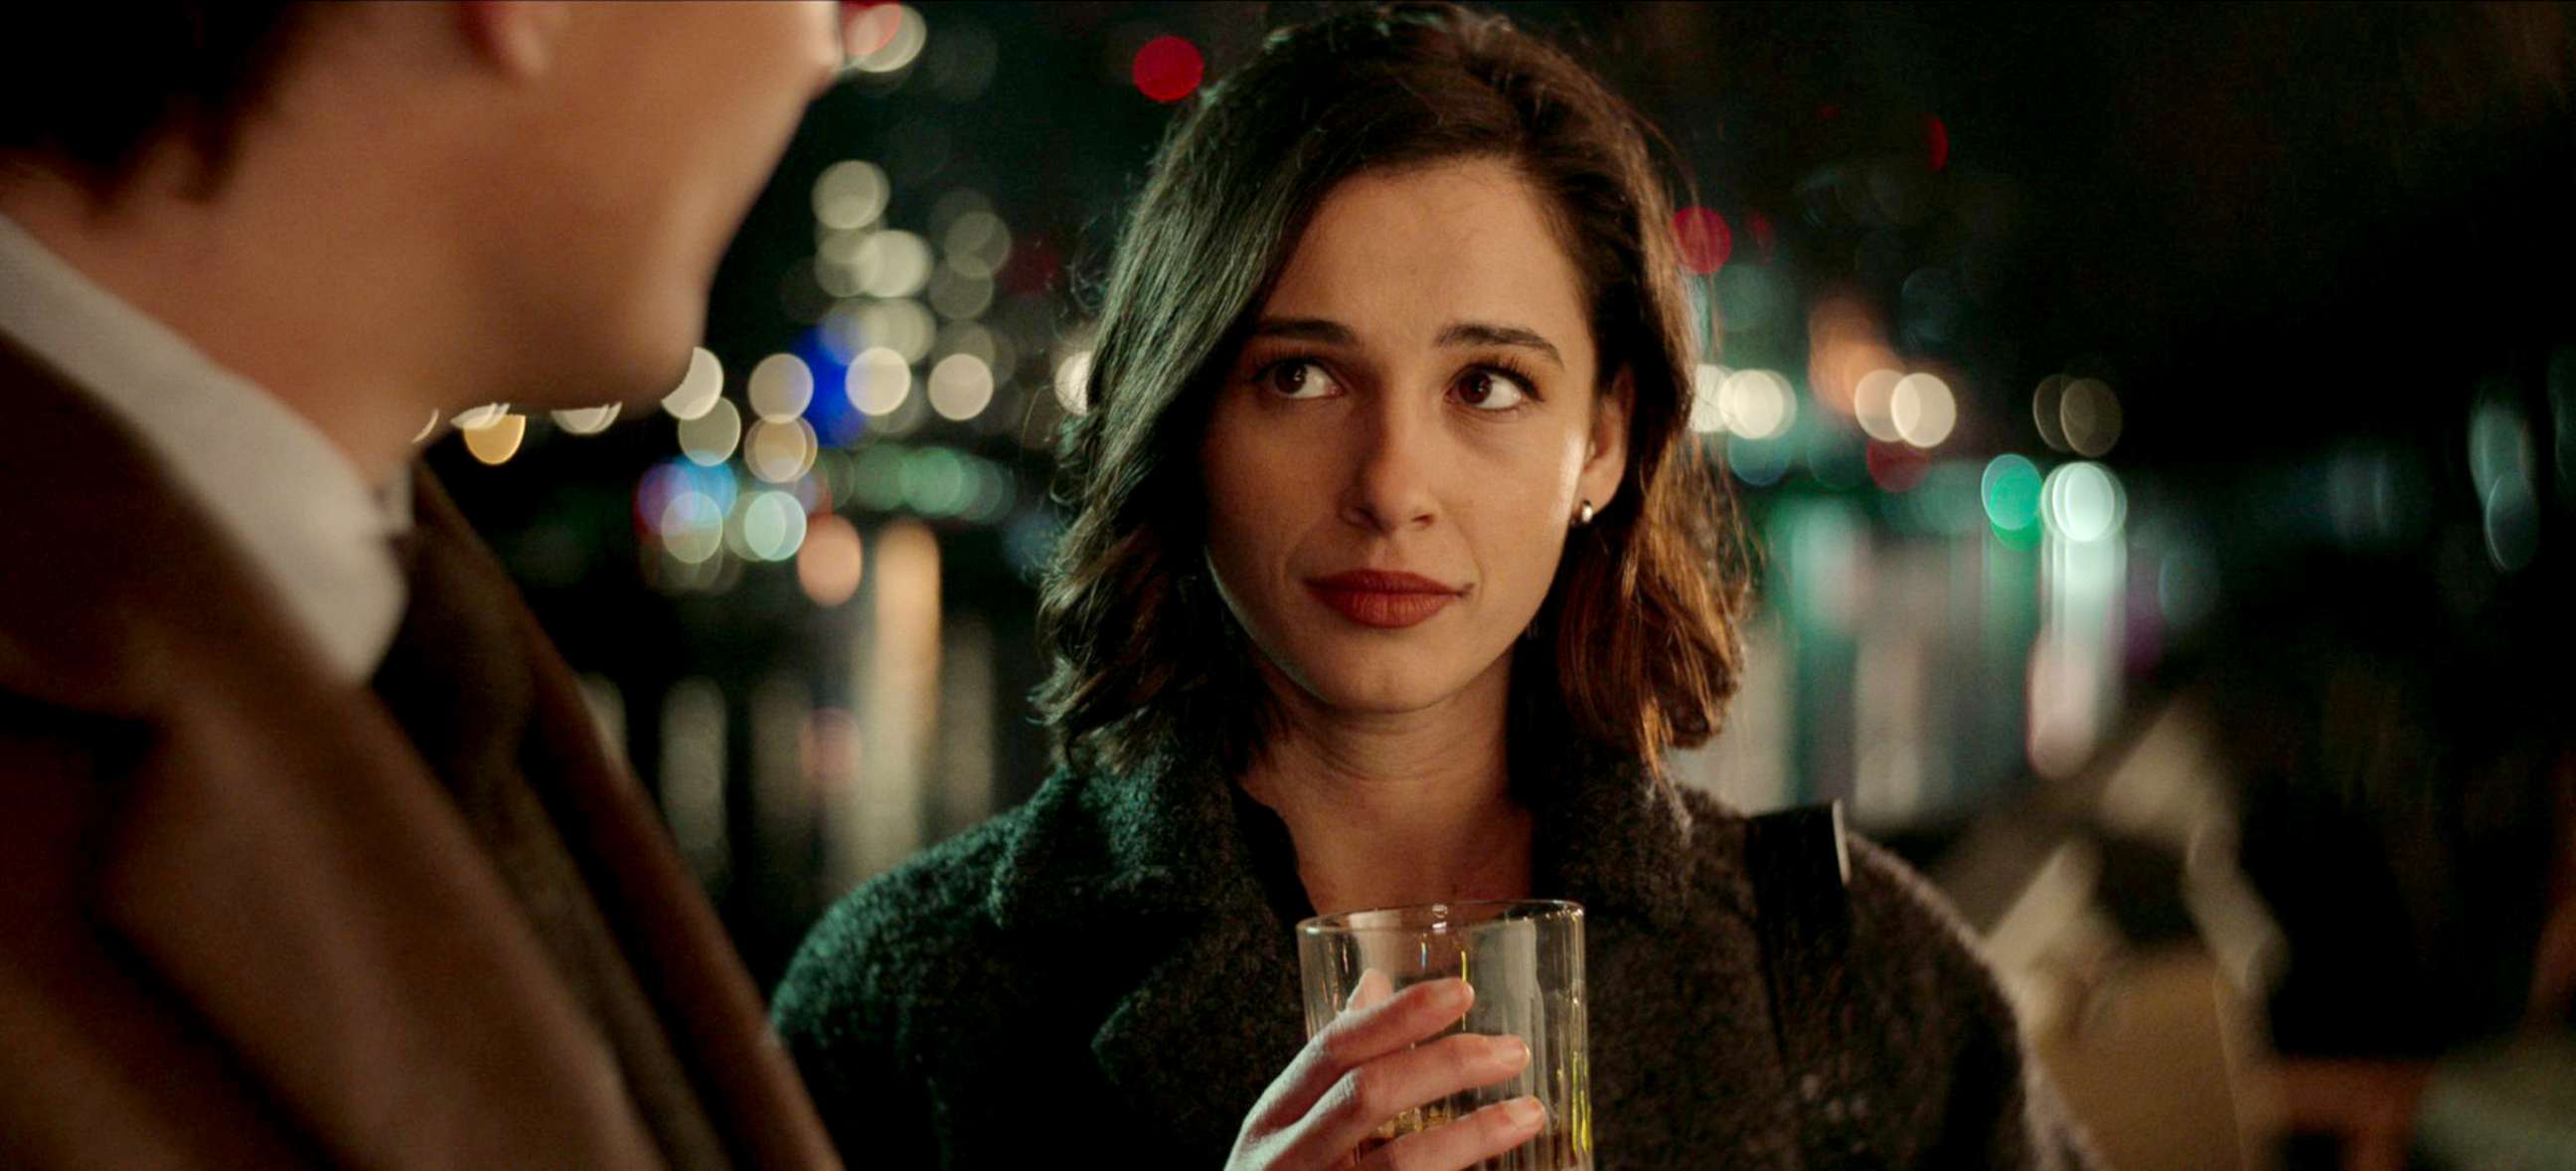 PHOTO: Naomi Scott appears in "Anatomy of a Scandal".